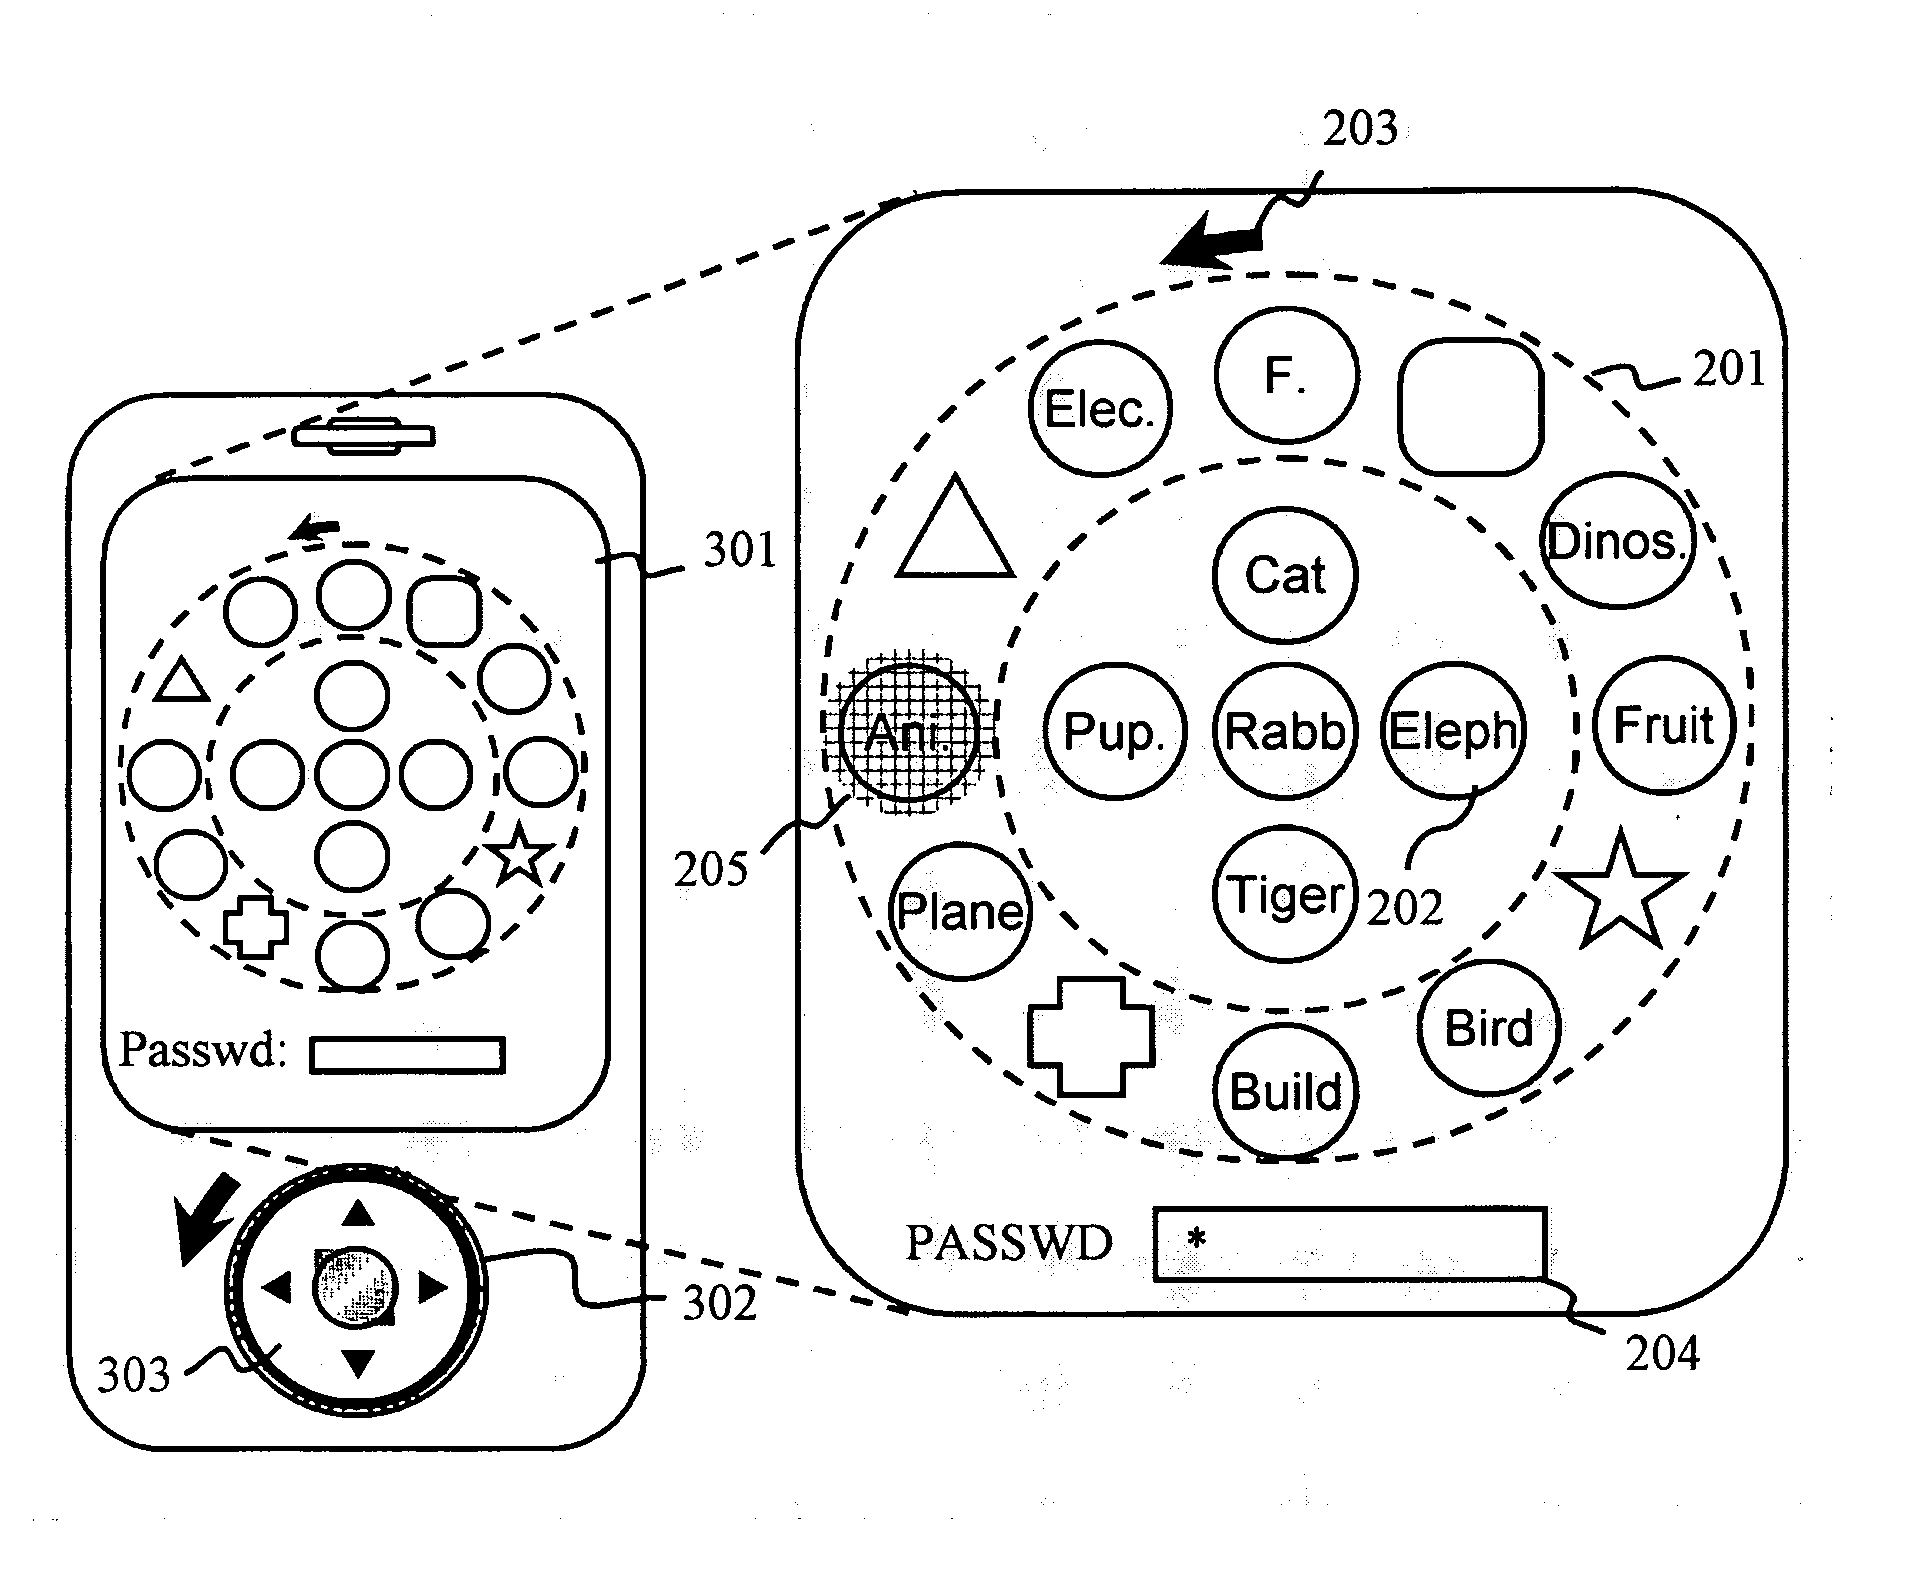 Apparatus and method for inputting graphical password using wheel interface in embedded system